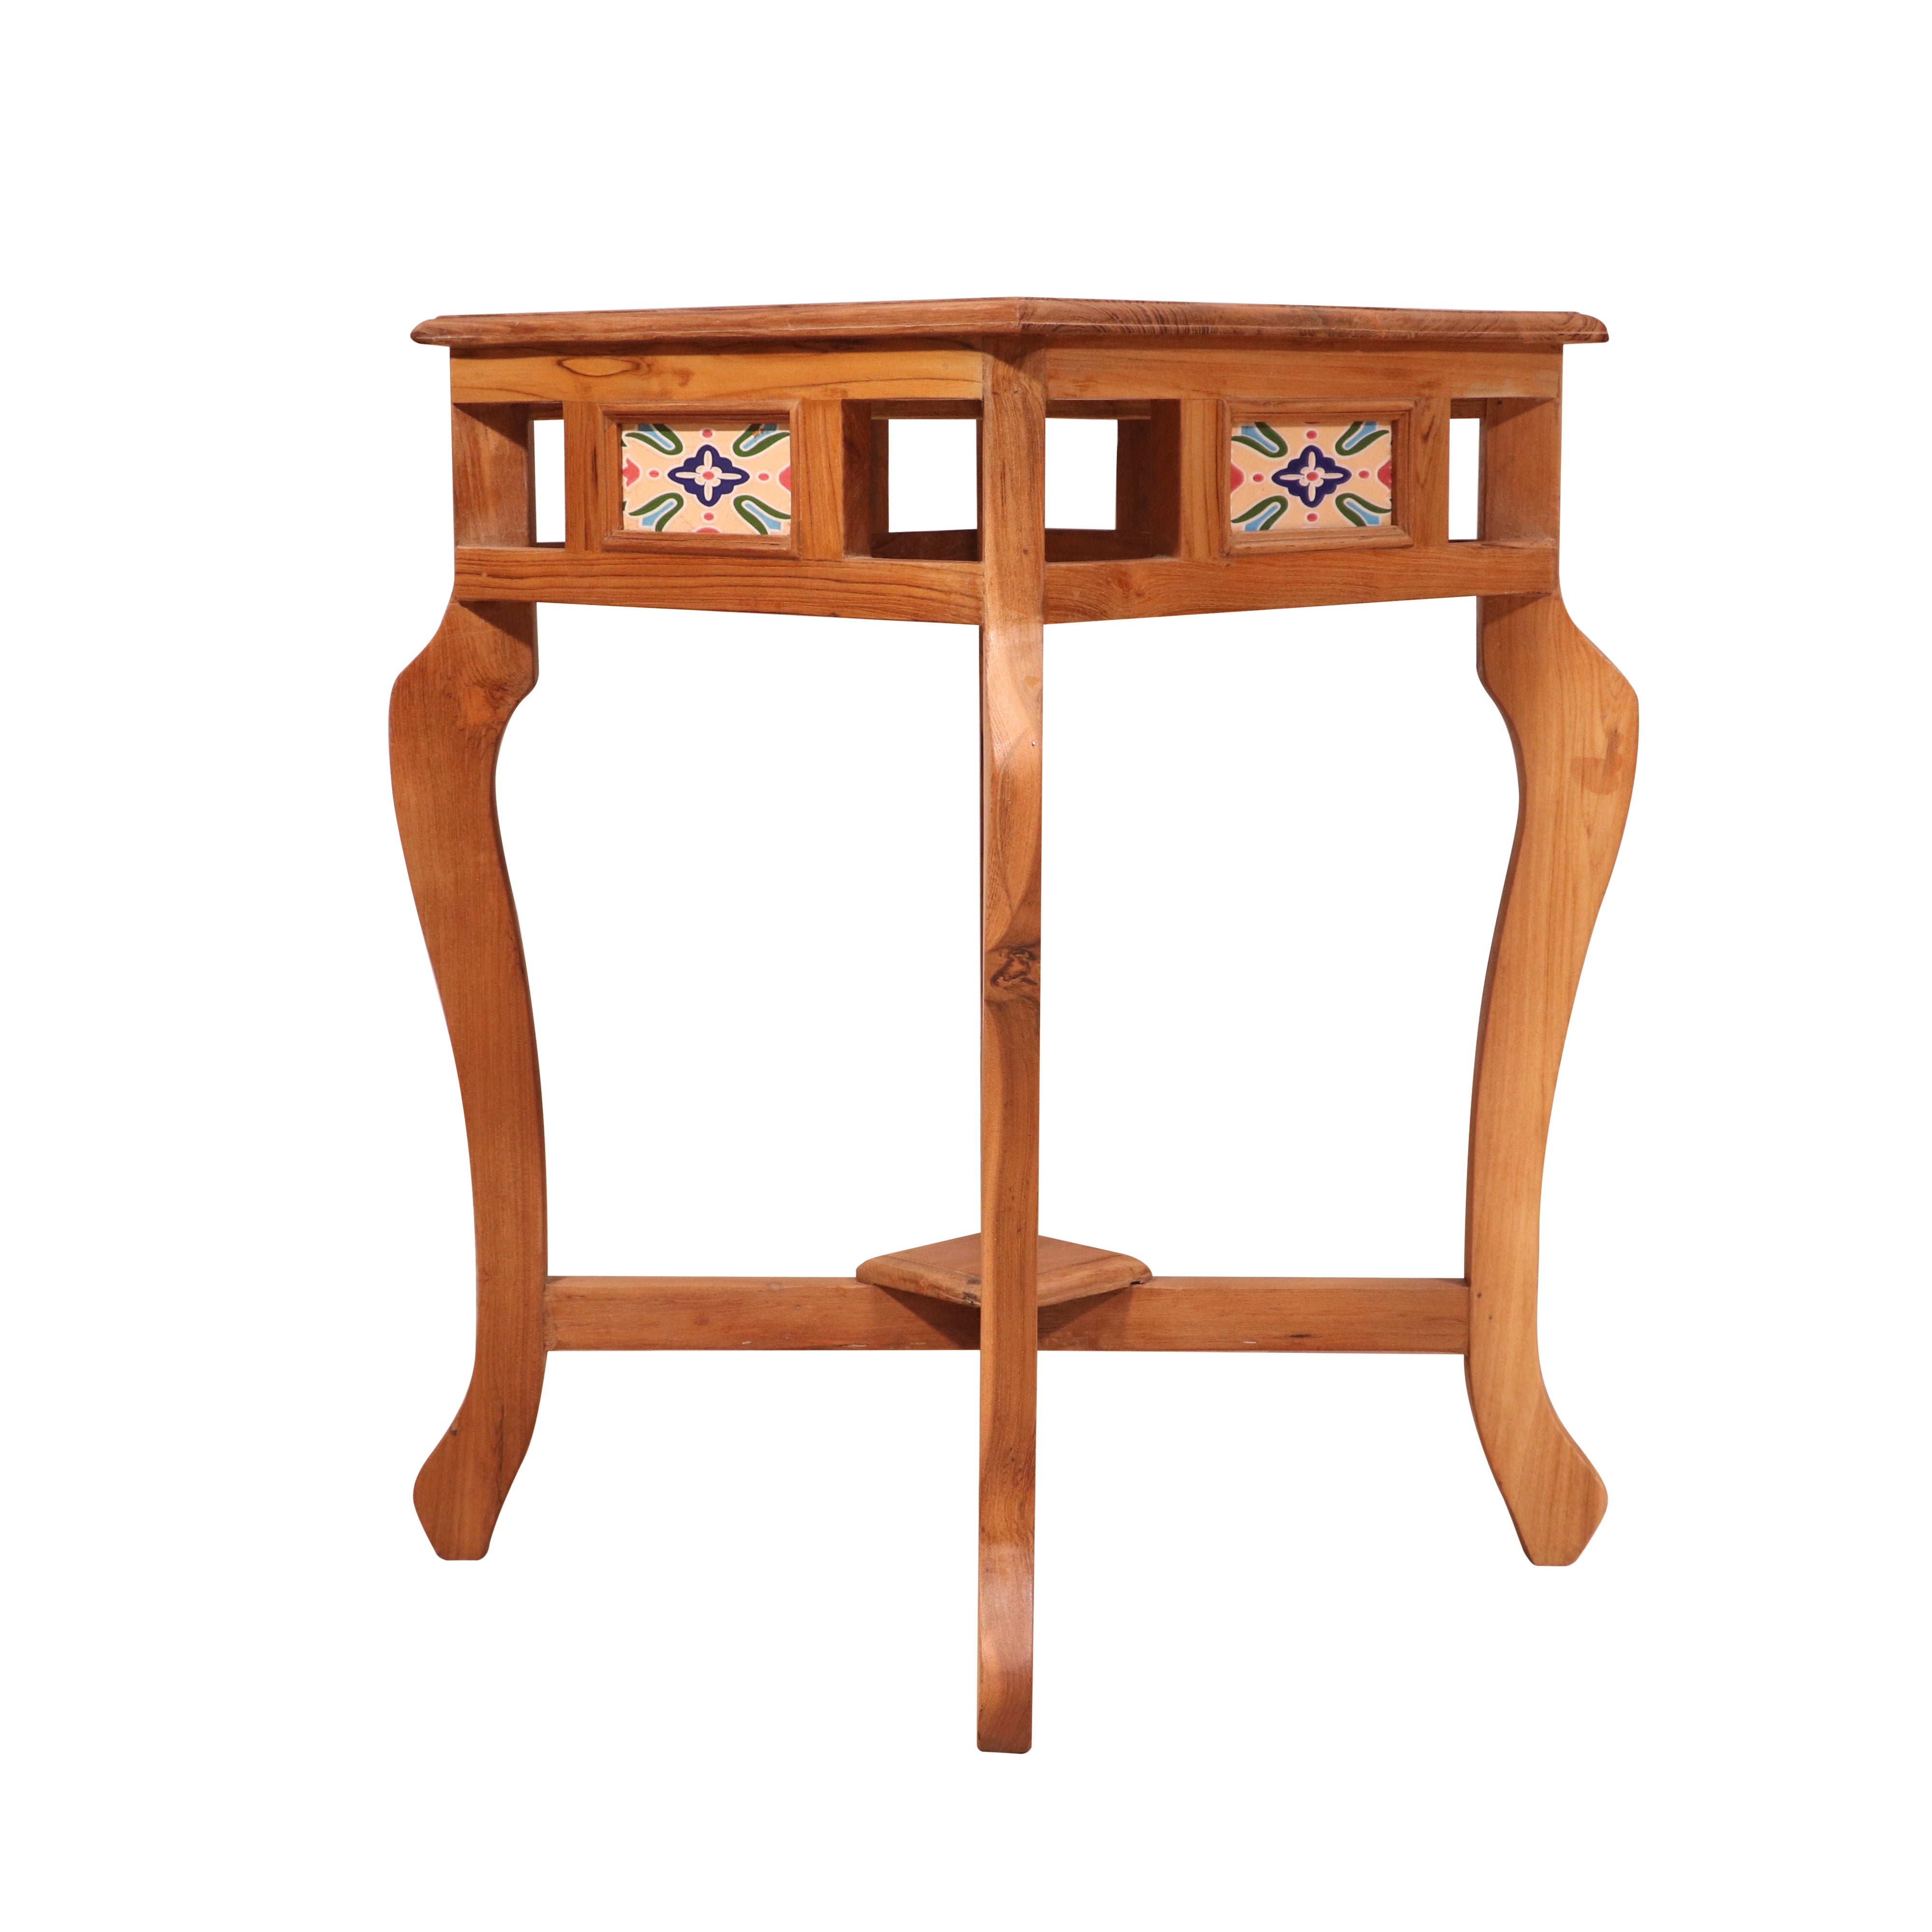 Traditional teak natural tone Table End Table